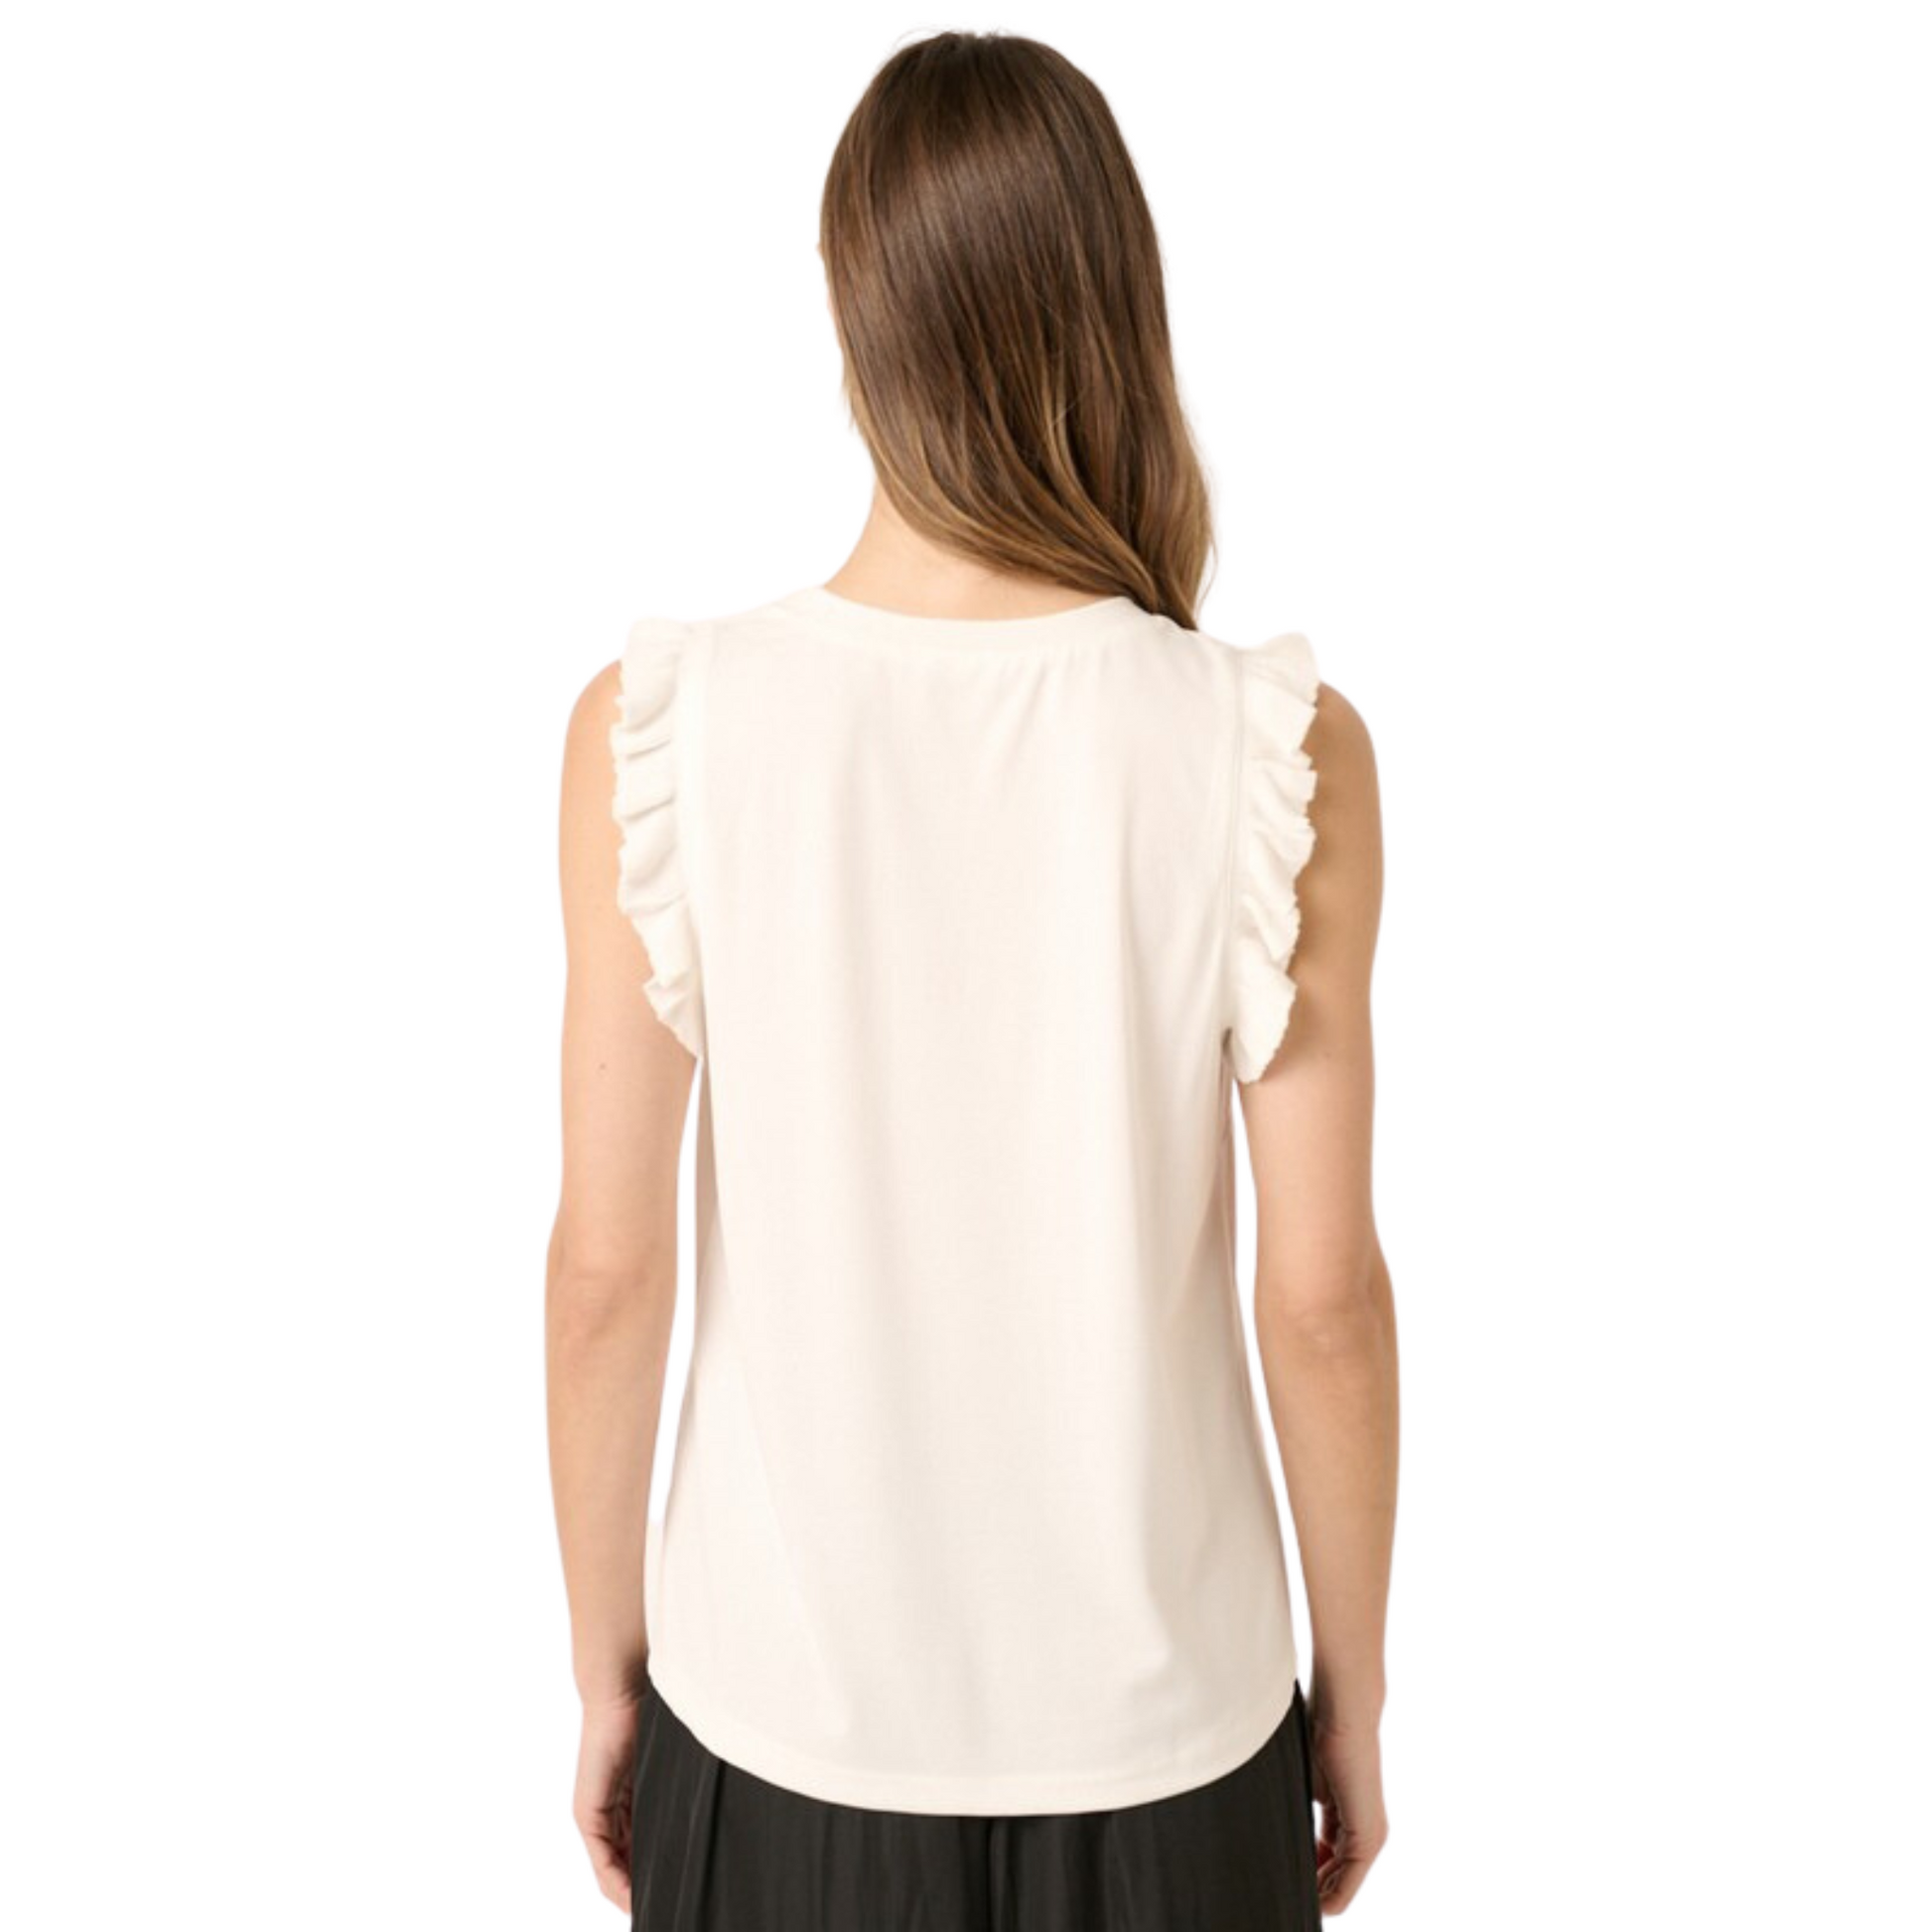 Ruffle trim cupro knit top in ivory 